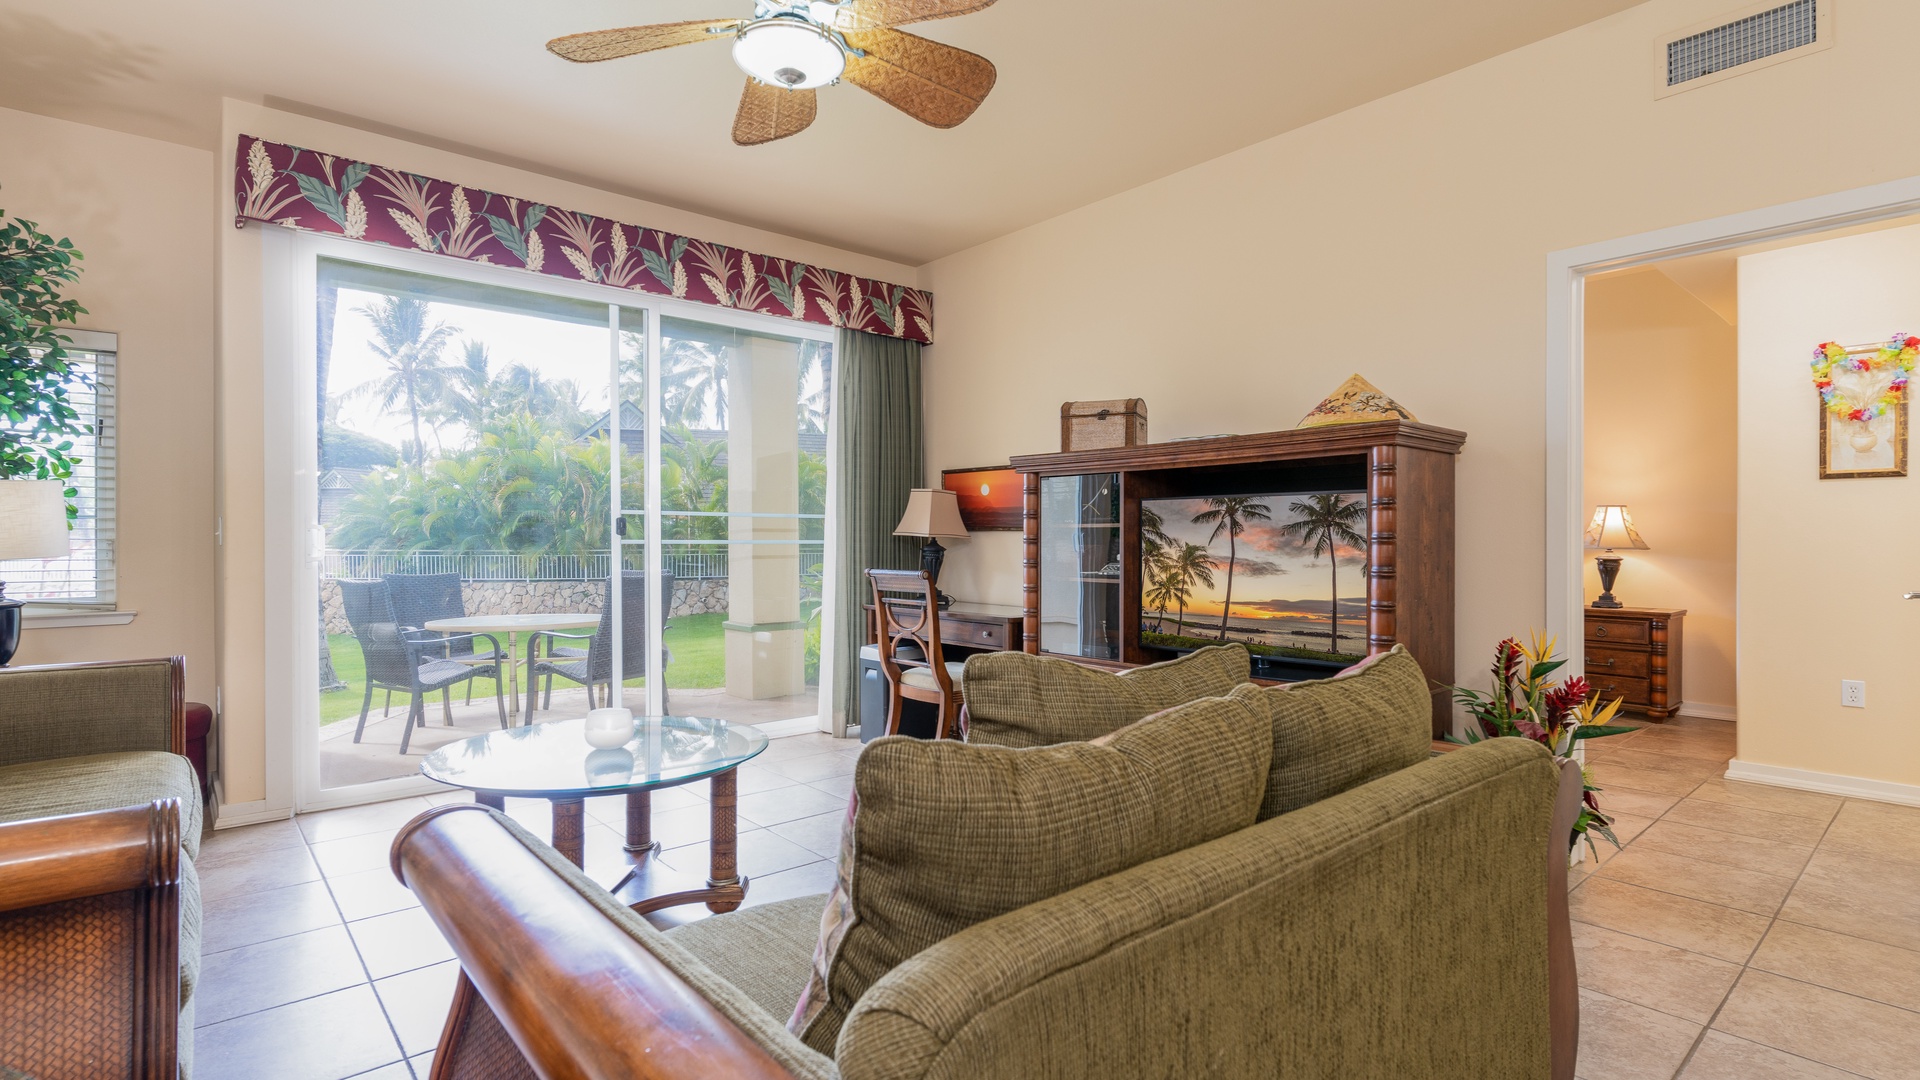 Kapolei Vacation Rentals, Kai Lani 8B - The open living area is comfortably appointed with natural lighting.